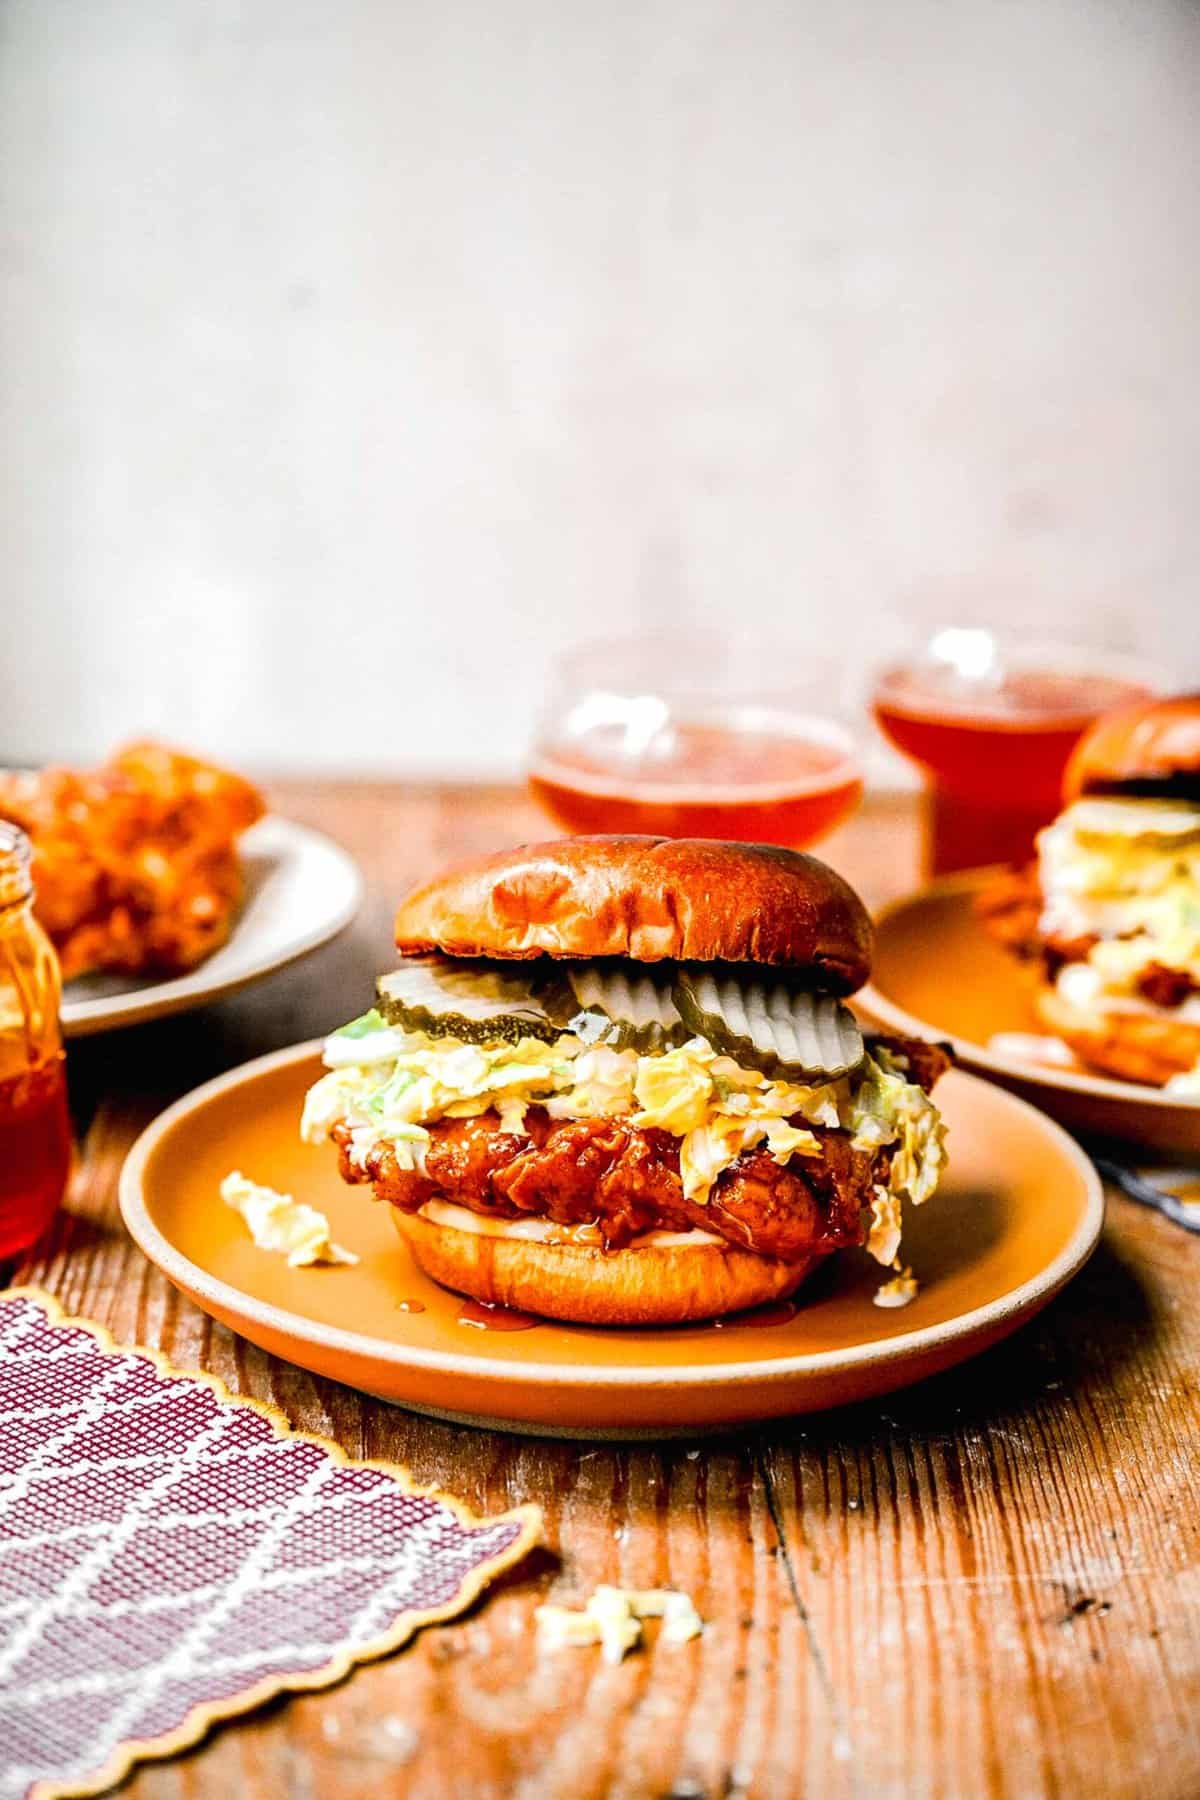 Hot honey chicken sandwiches on plates near a jar of hot honey and 2 glasses full of an beverage.